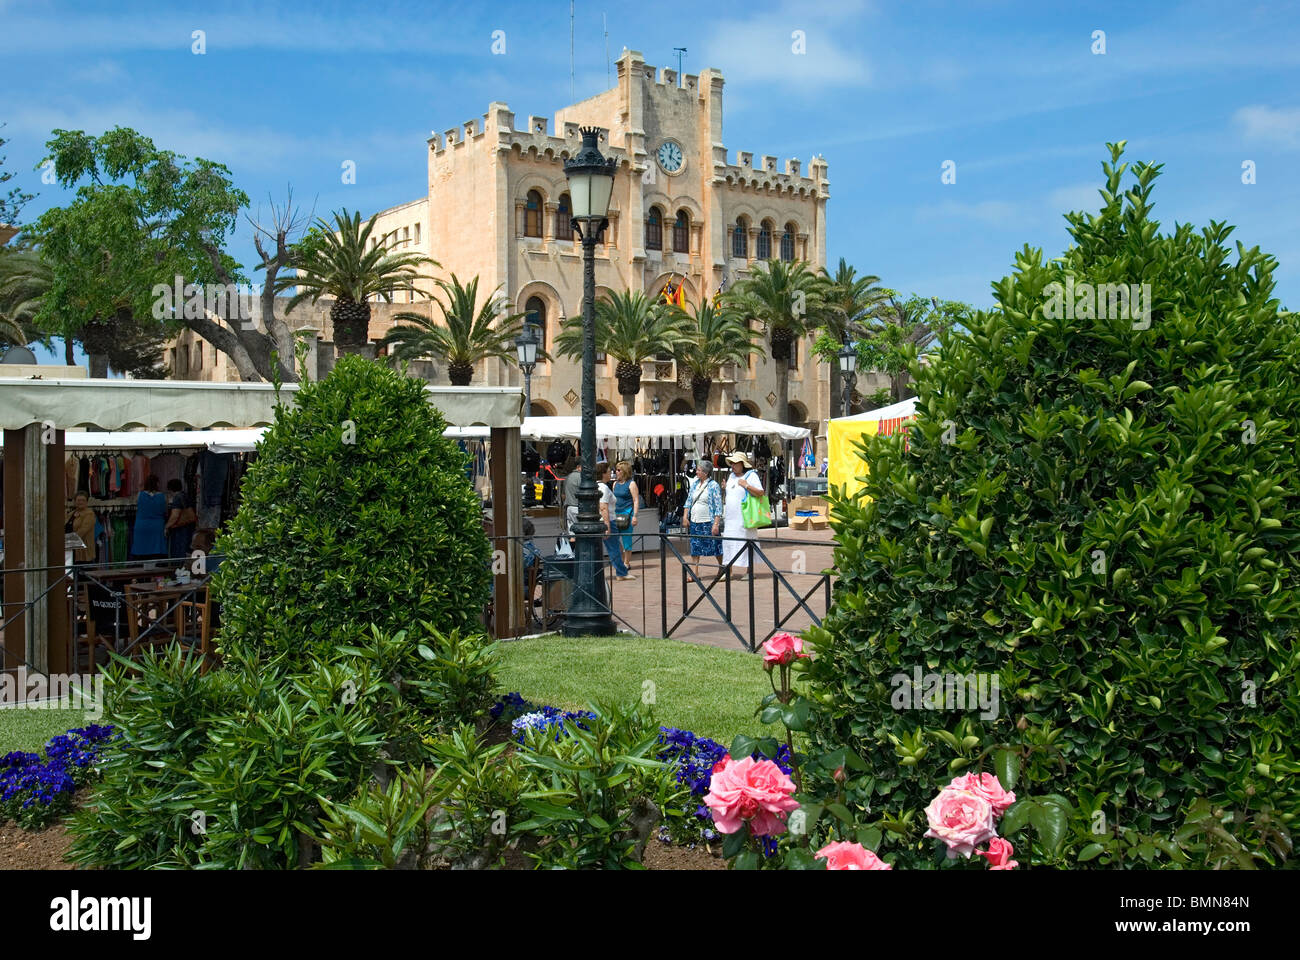 Market day in the square in front of the Town Hall, Ciutadella, Minorca, Balearics, Spain Stock Photo